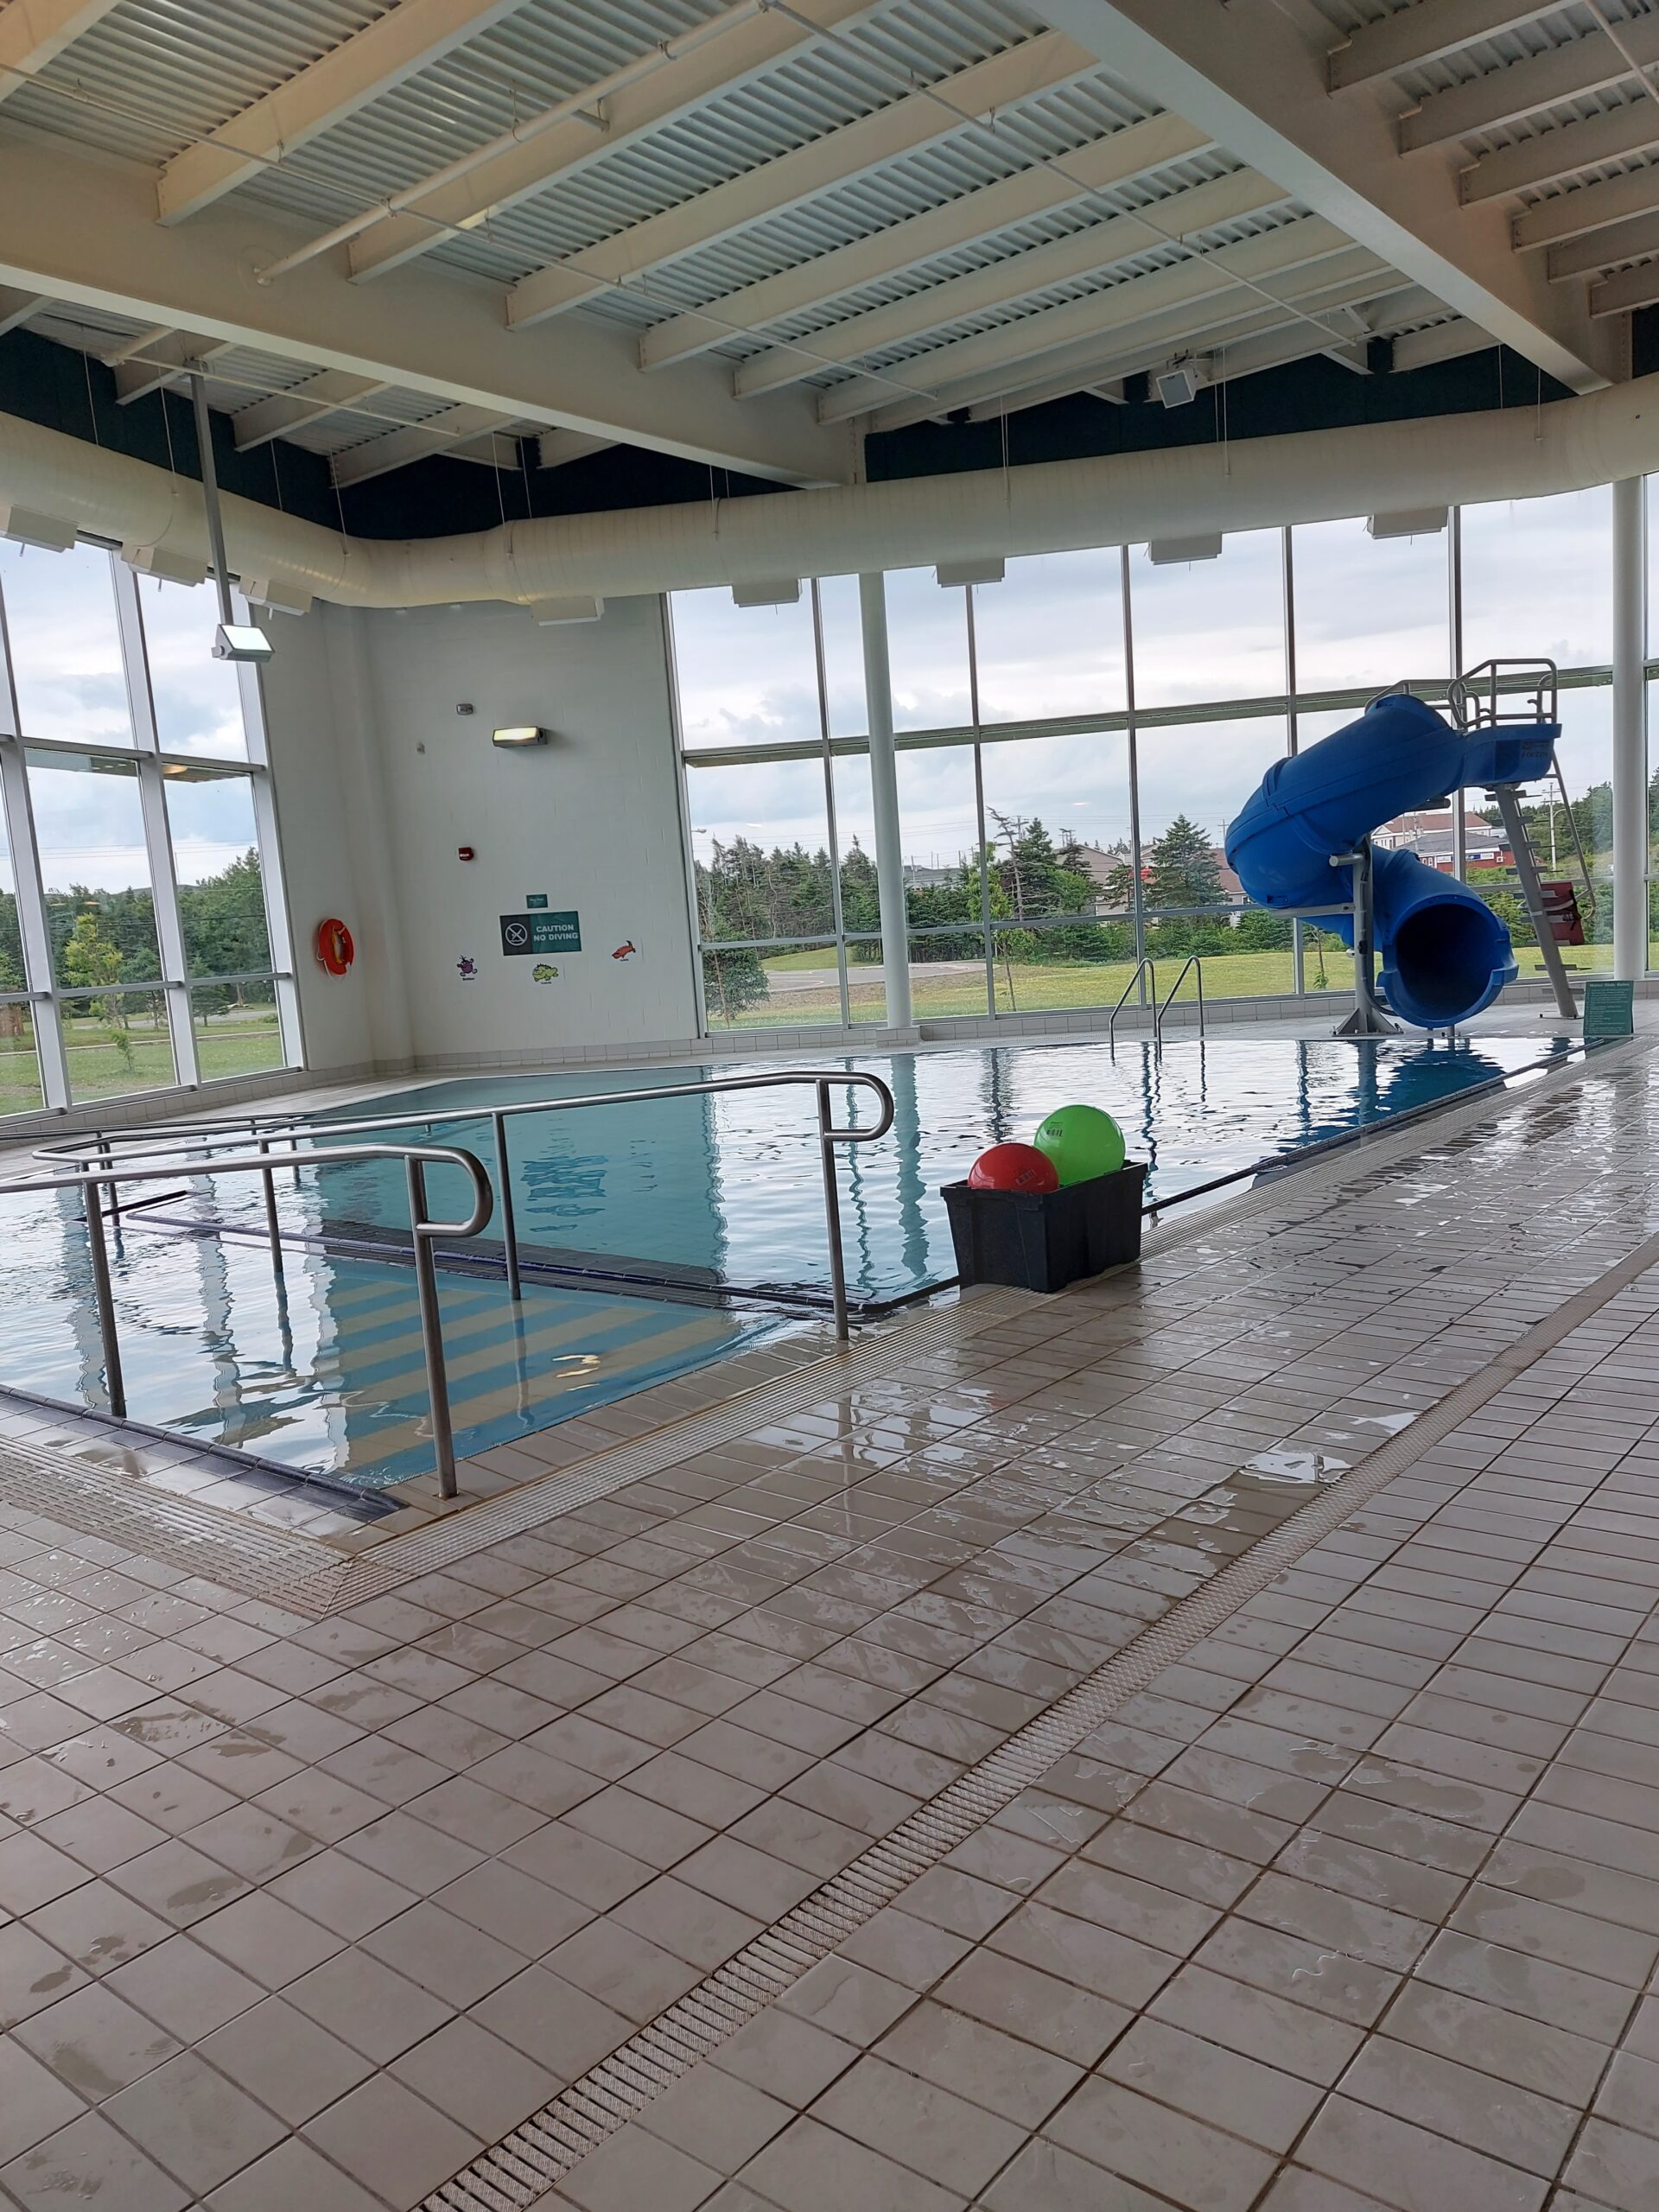 a wide angle view of a pool with a slide and ramp